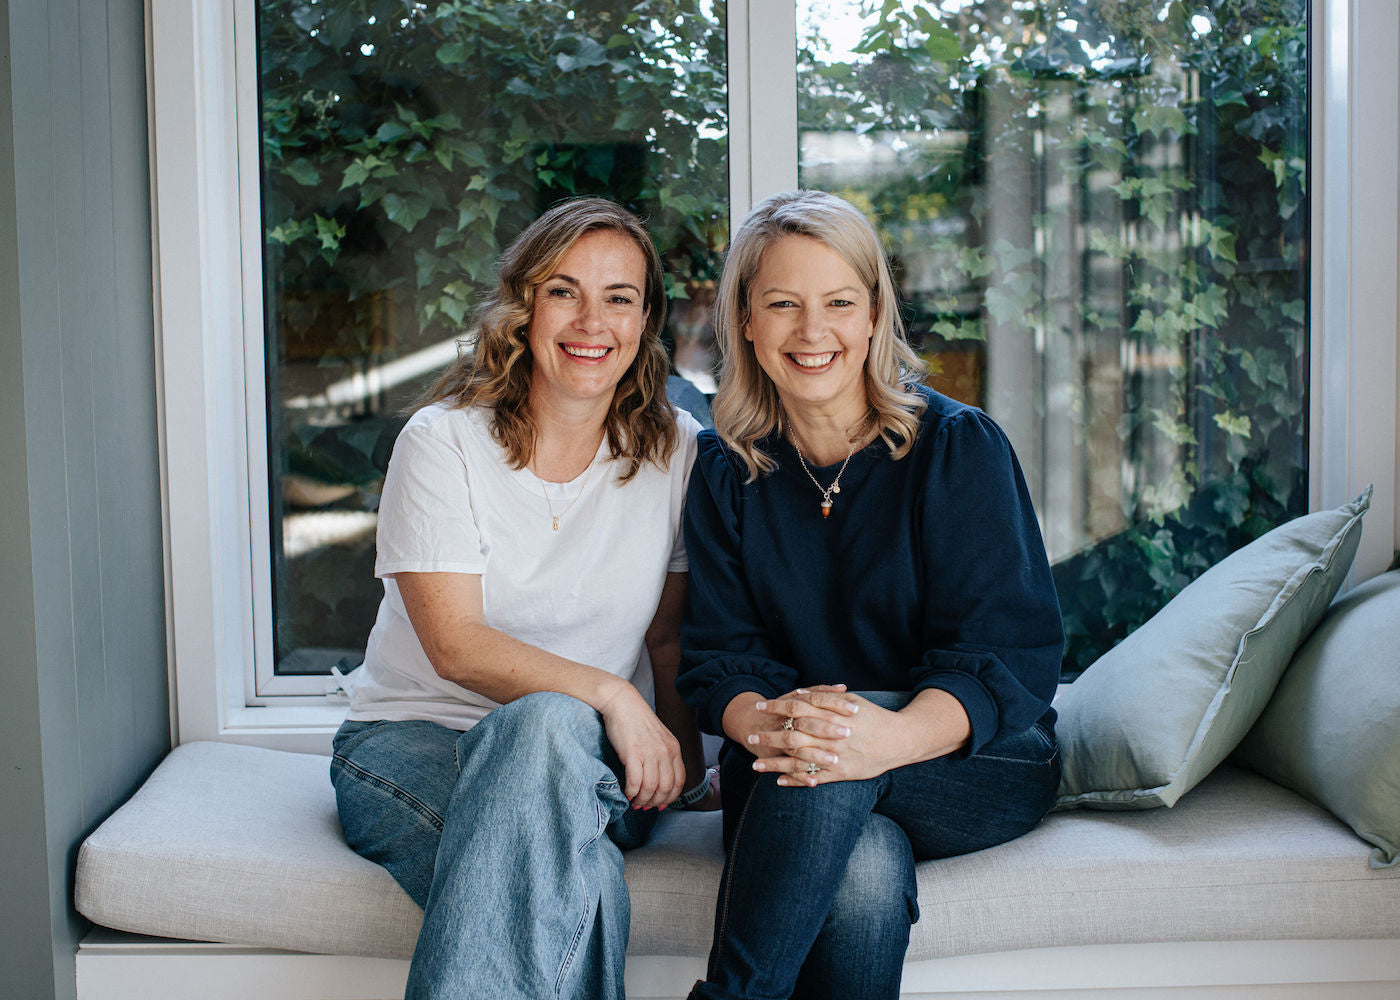 Our Story - Meet The Founders of Hello Period